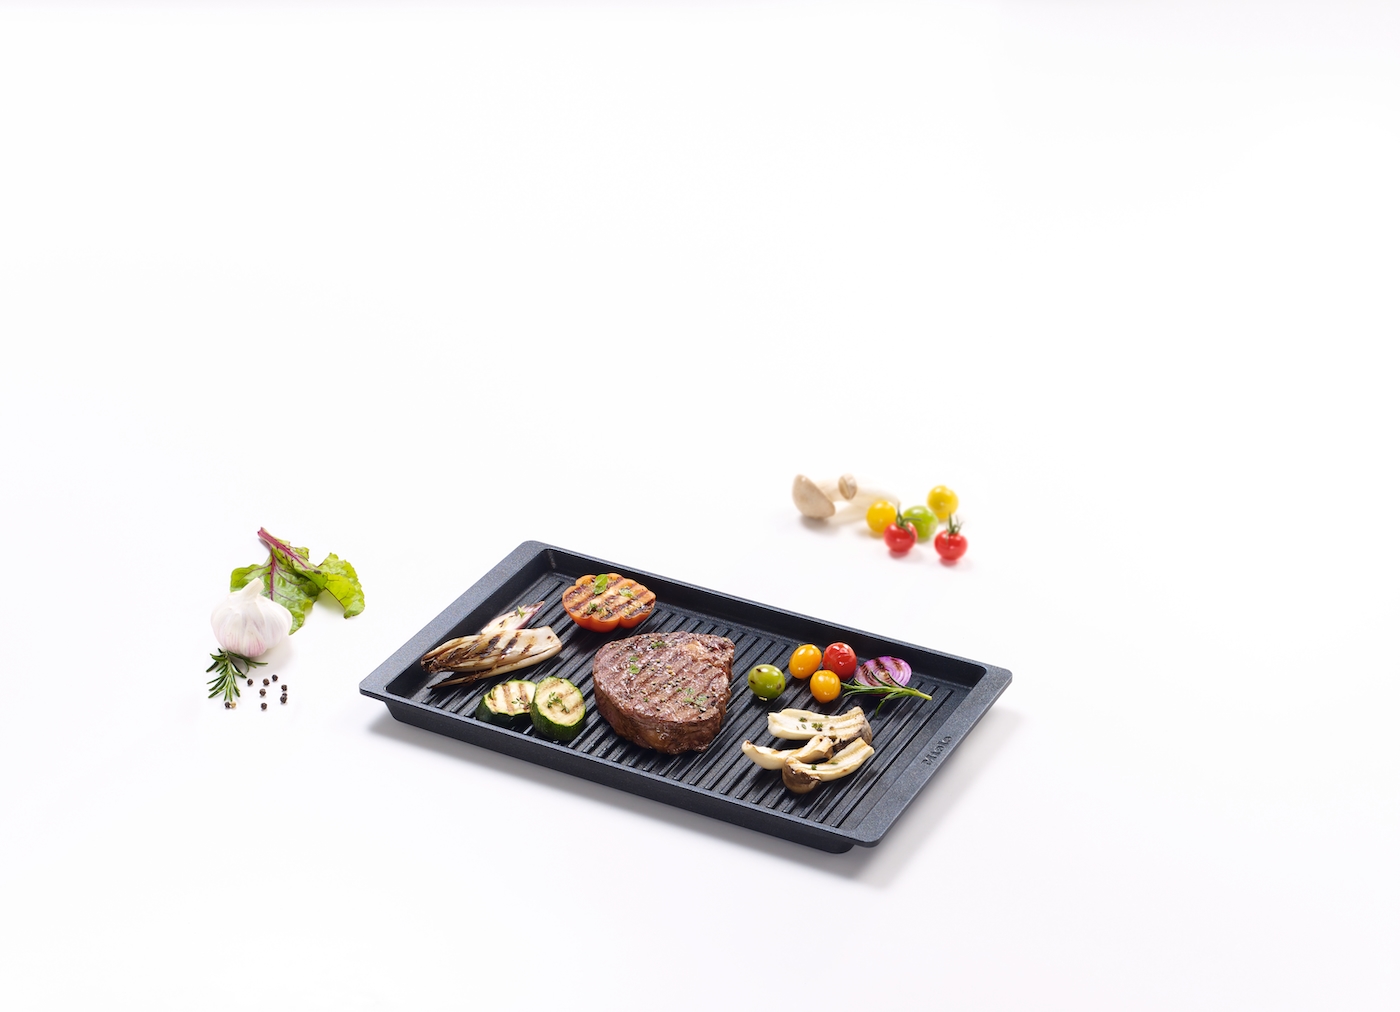 GGRP Gourmet Griddle Plate product photo Laydowns Detail View ZOOM